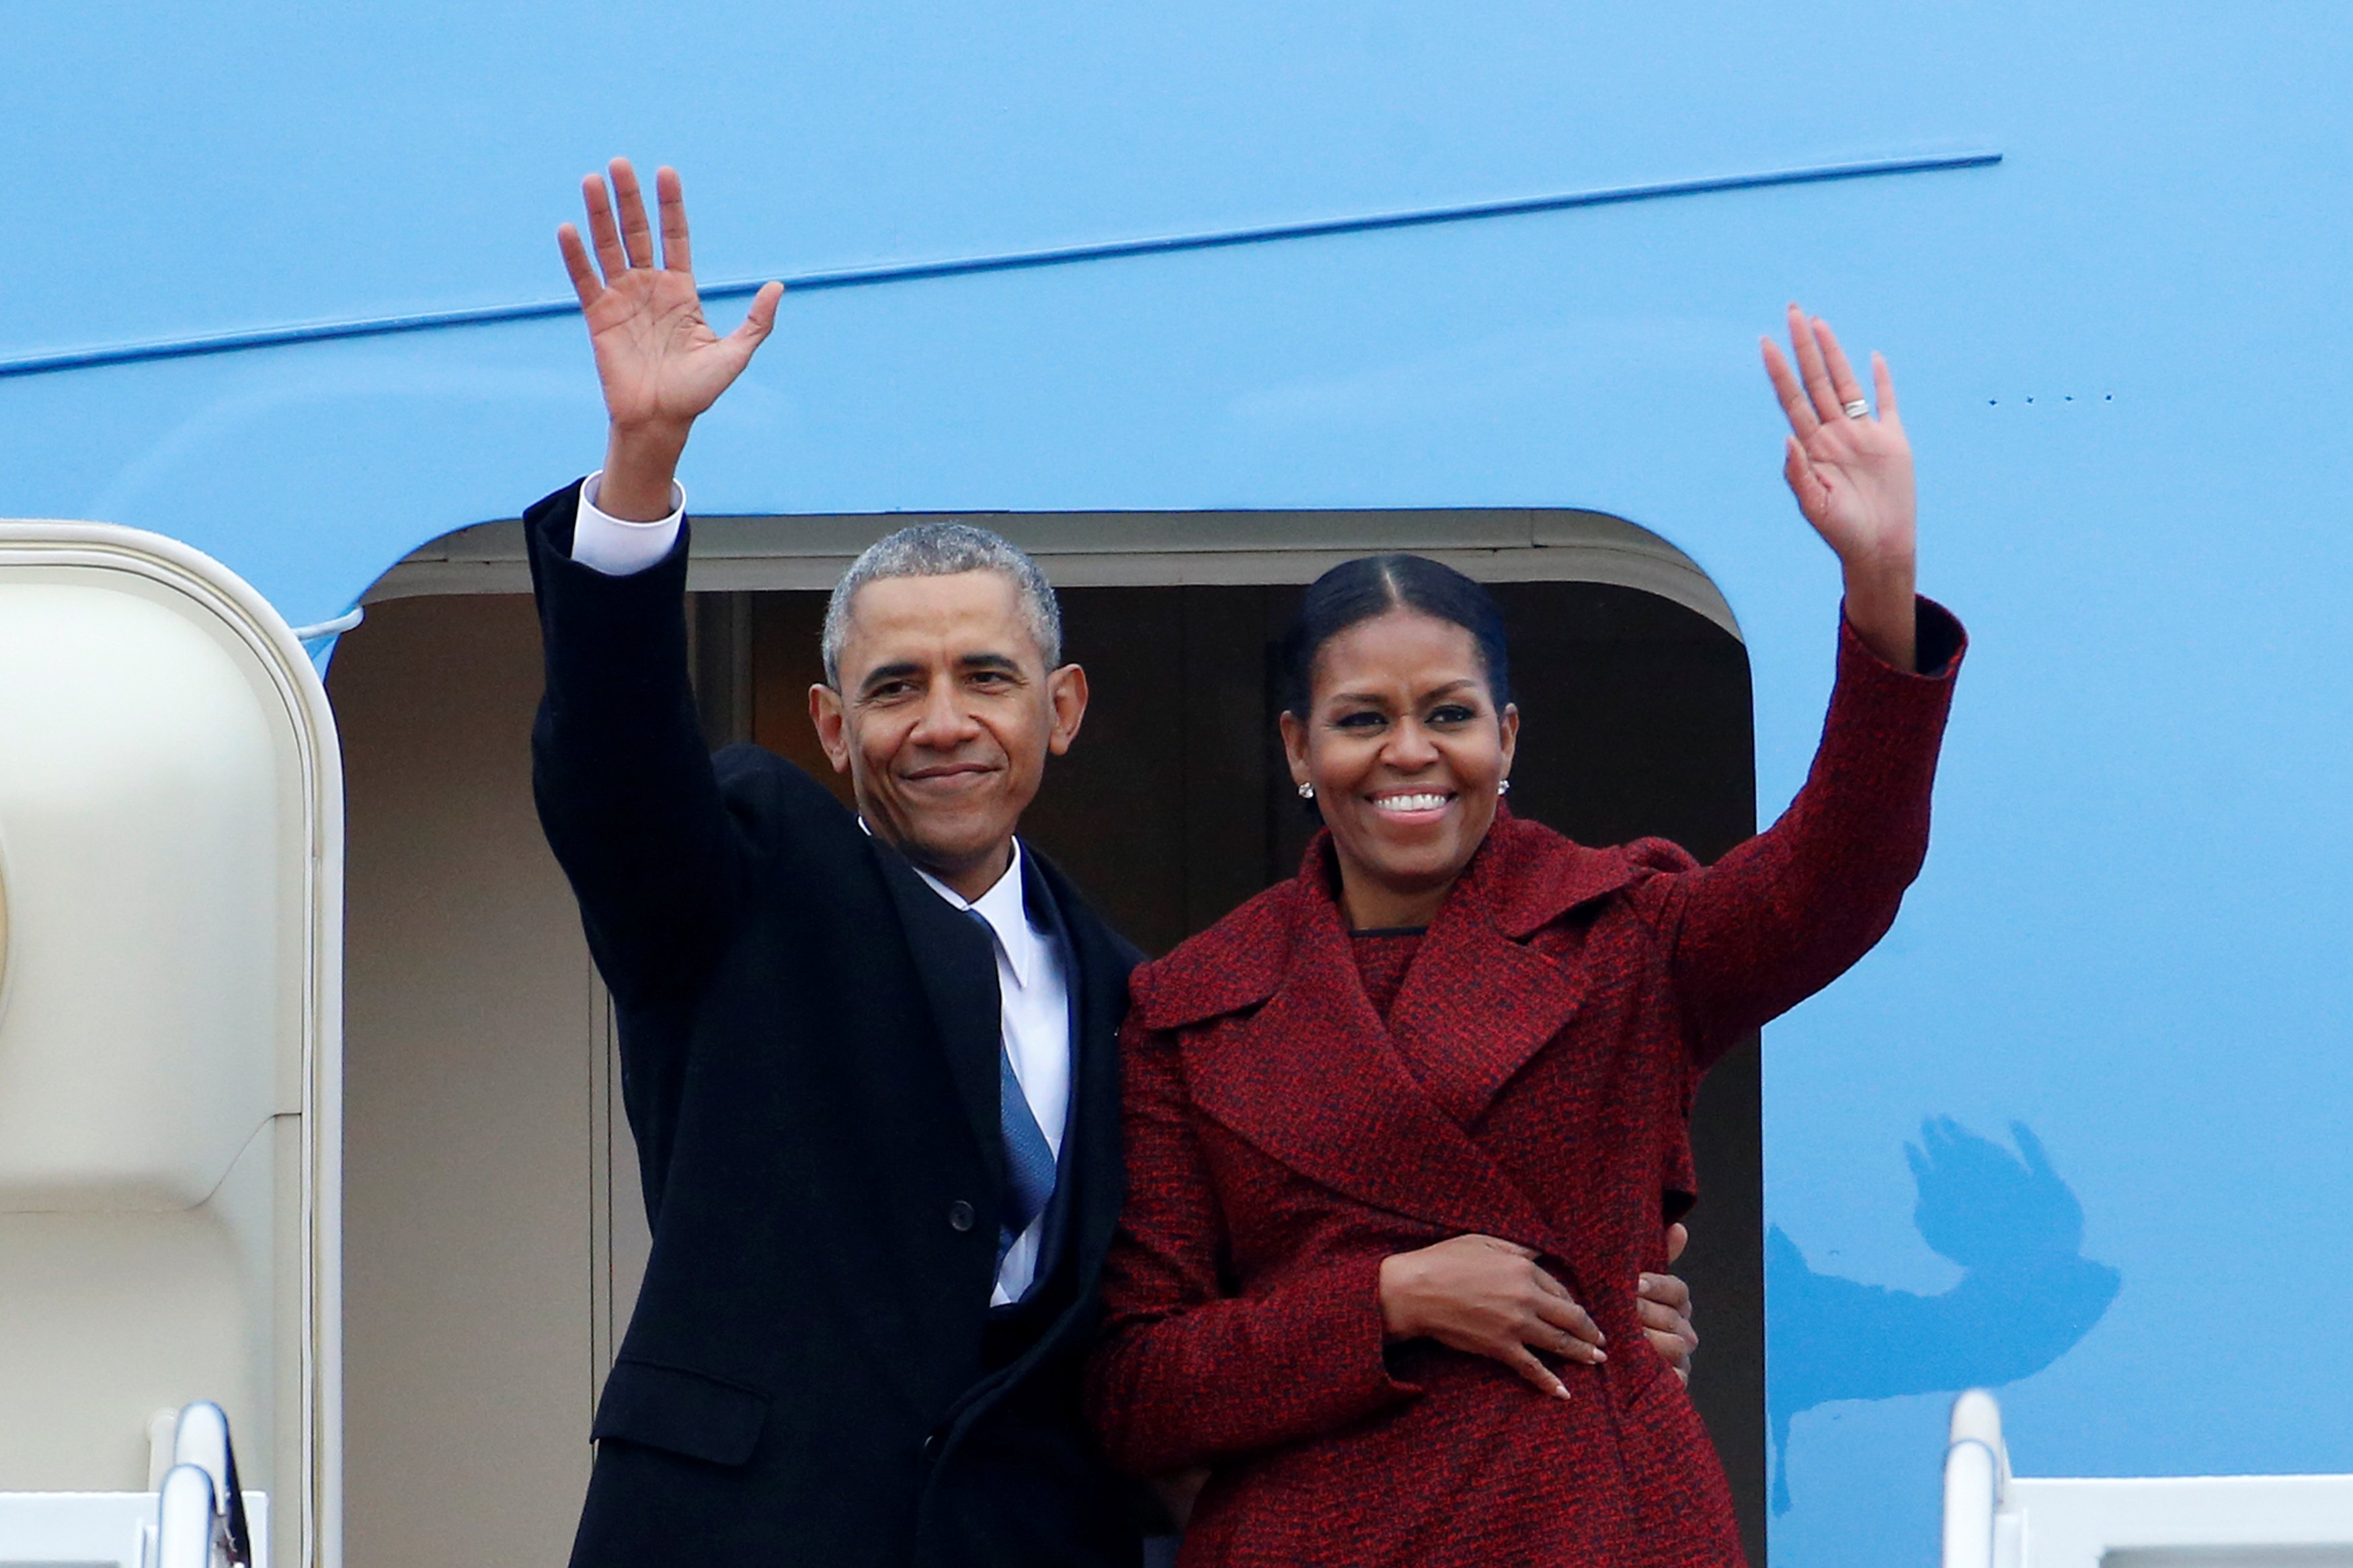 Former president Barack Obama waves with his wife Michelle as they board Special Air Mission 28000, a Boeing 747 which serves as Air Force One, at Joint Base Andrews, Maryland, U.S. January 20, 2017. (REUTERS/Brendan McDermid)